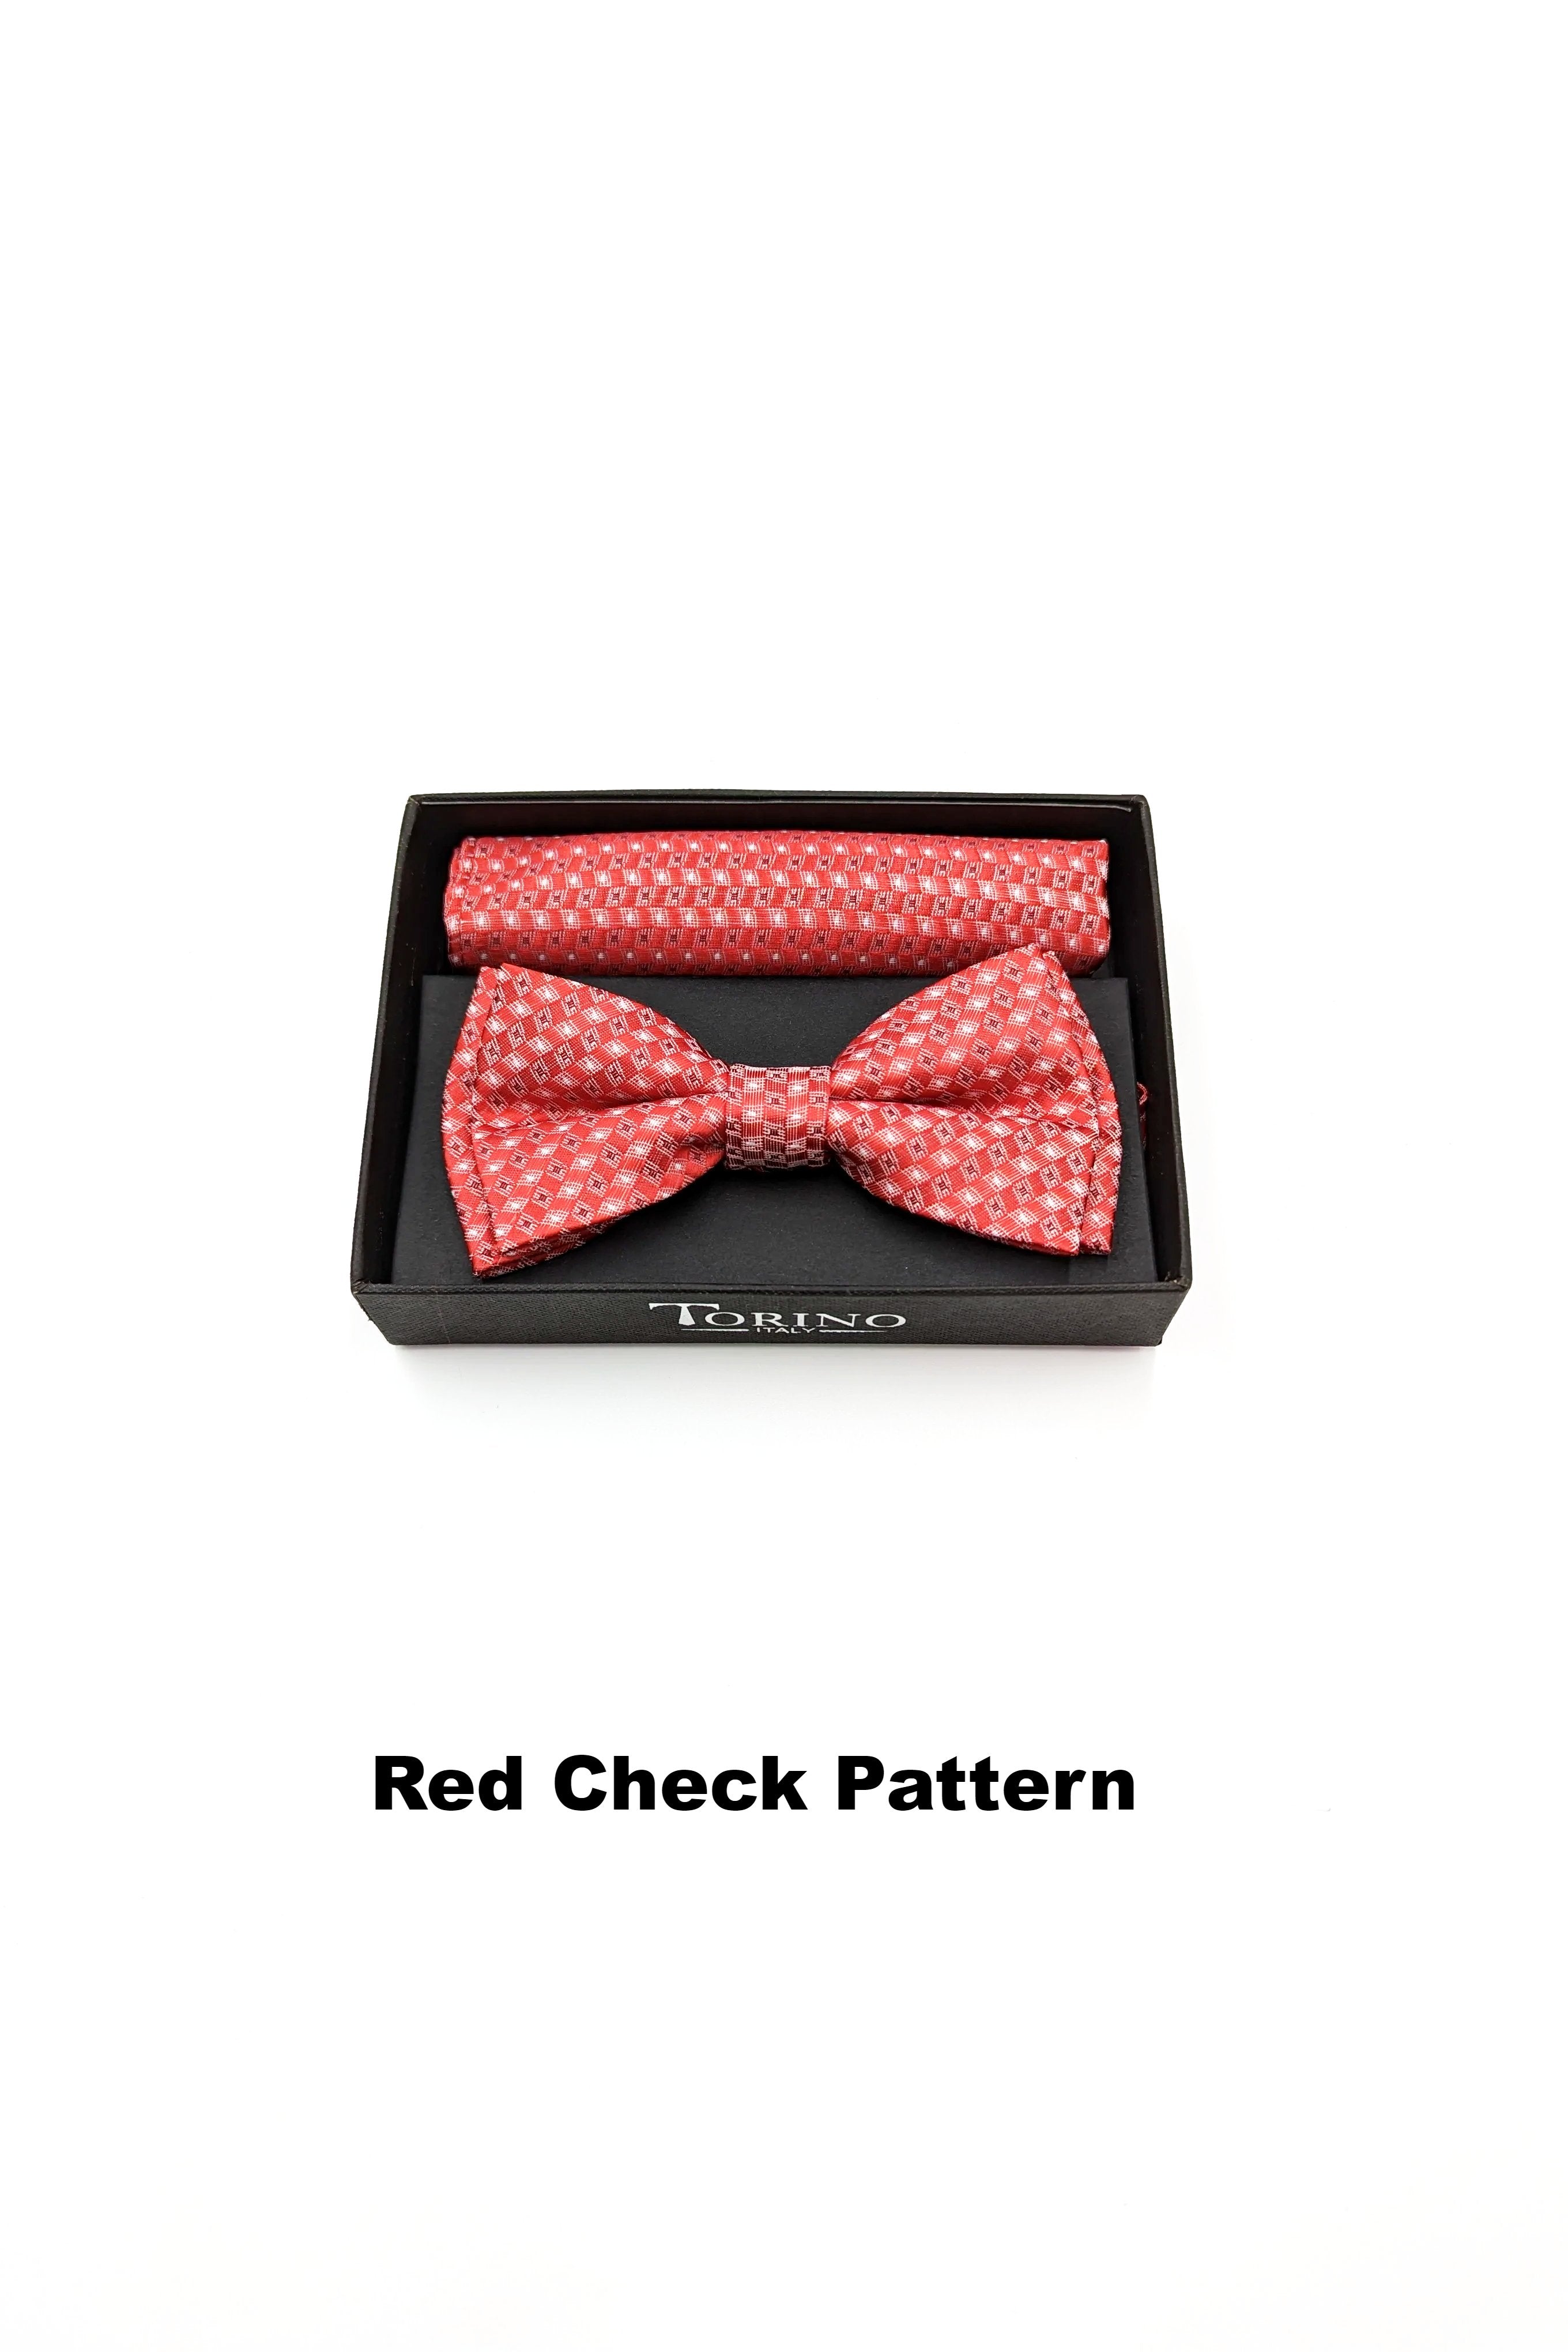 Textured Mens Red Check Pattern Bow and Pocket Square